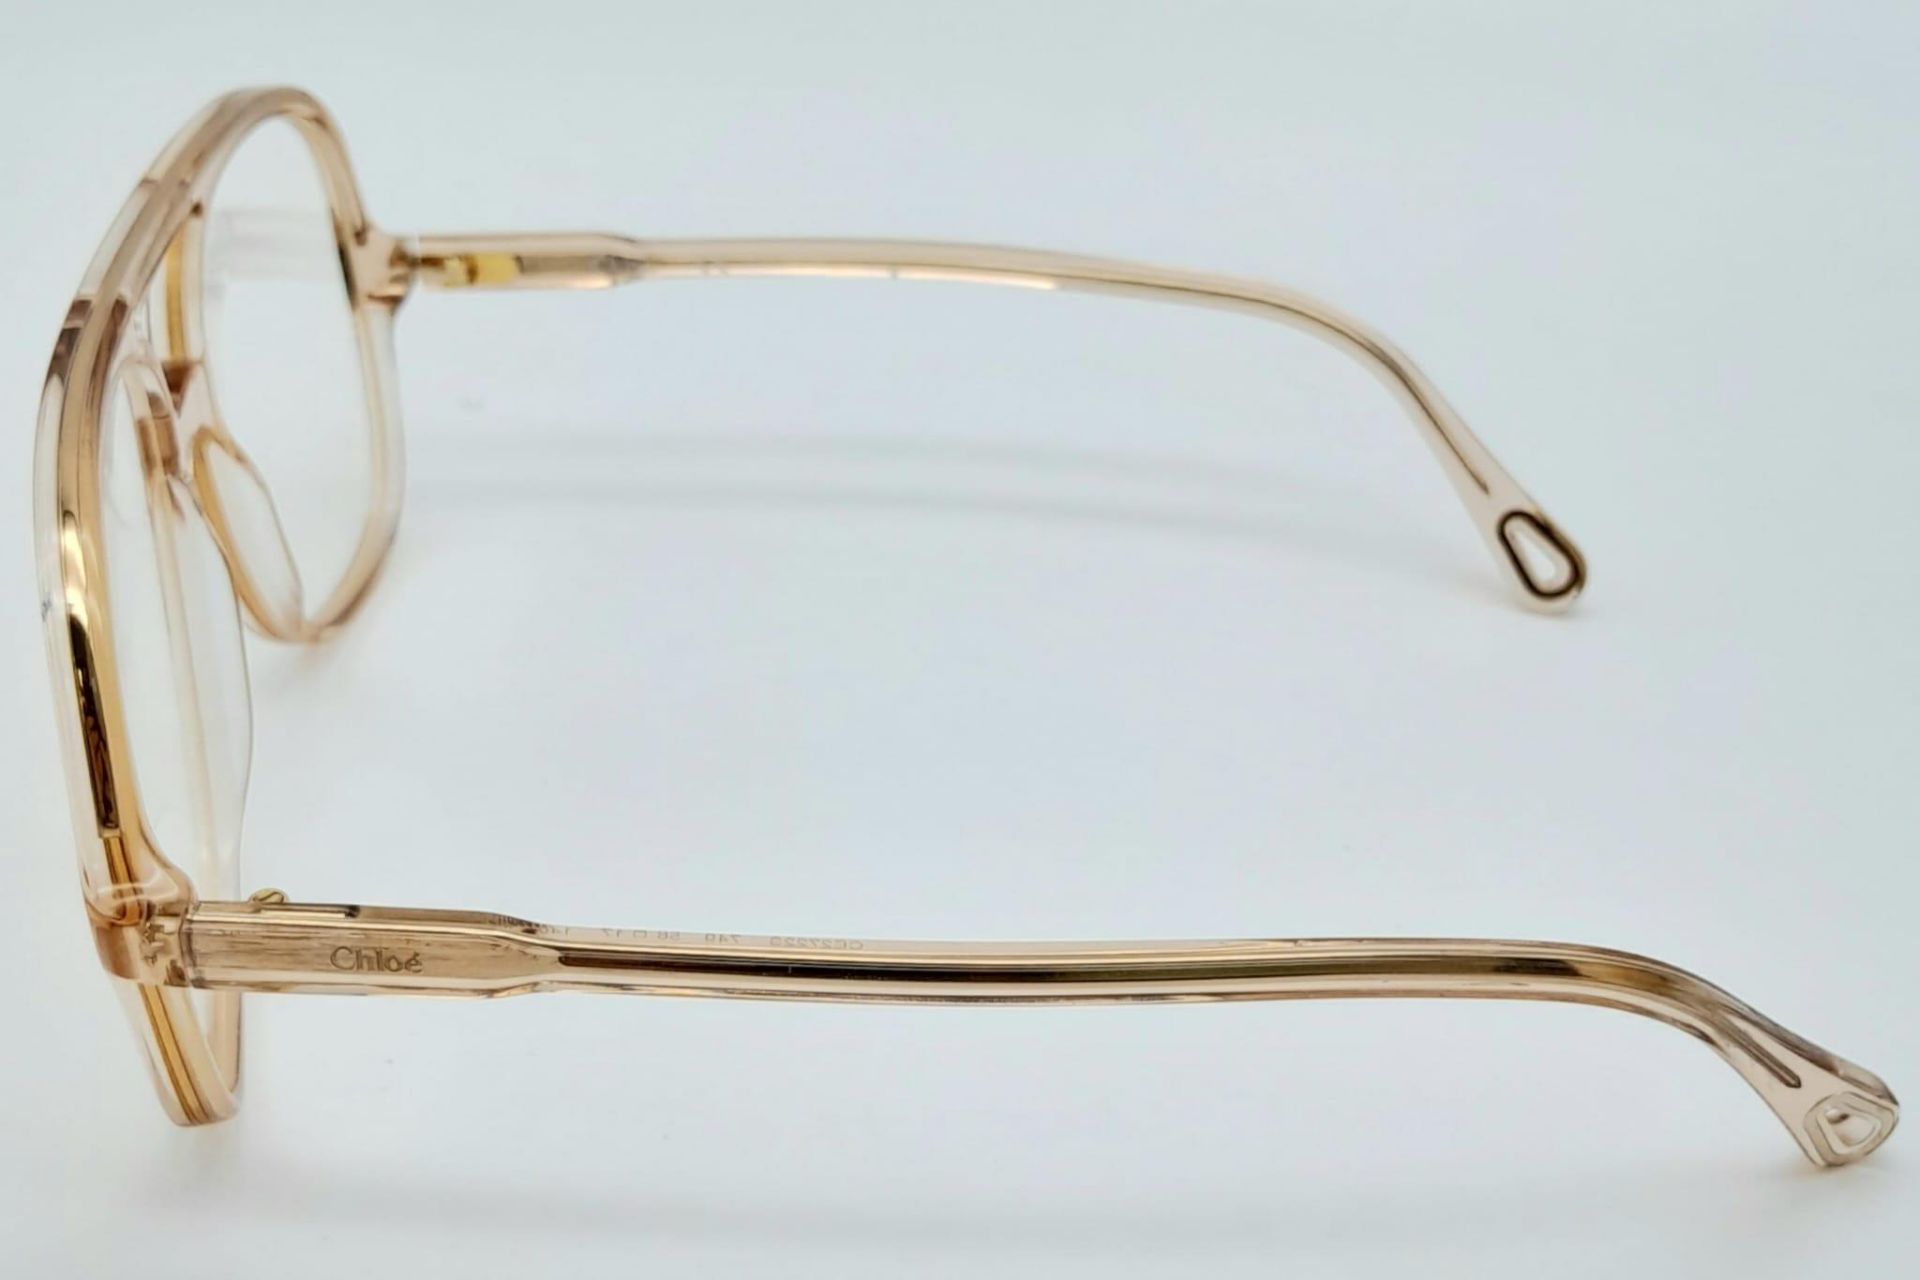 Chloe 'Patty' Eyeglasses. Large navigator shape/style and nude colour, Patty brings a 70s-inspired - Bild 7 aus 11